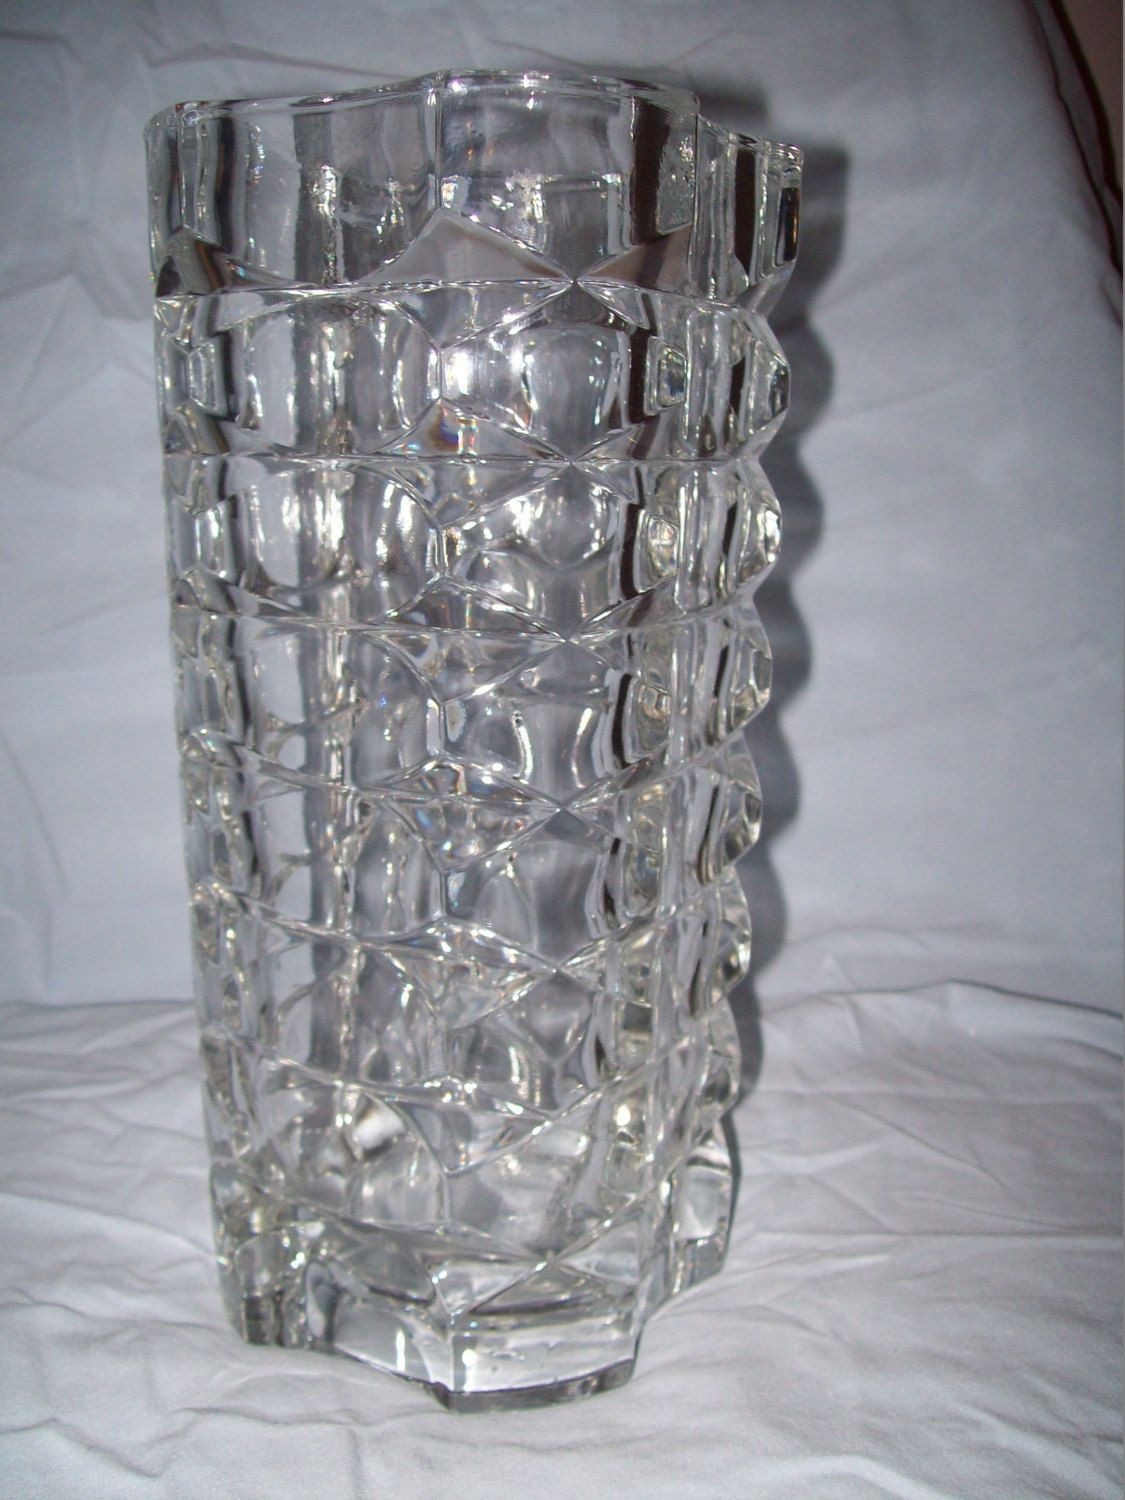 23 Lovely Tall Thick Glass Vase 2024 free download tall thick glass vase of clear glass vases stock tall vase centerpiece ideas vases flower in clear glass vases image clear glass very old large vase leaded glass very heavy 66 00